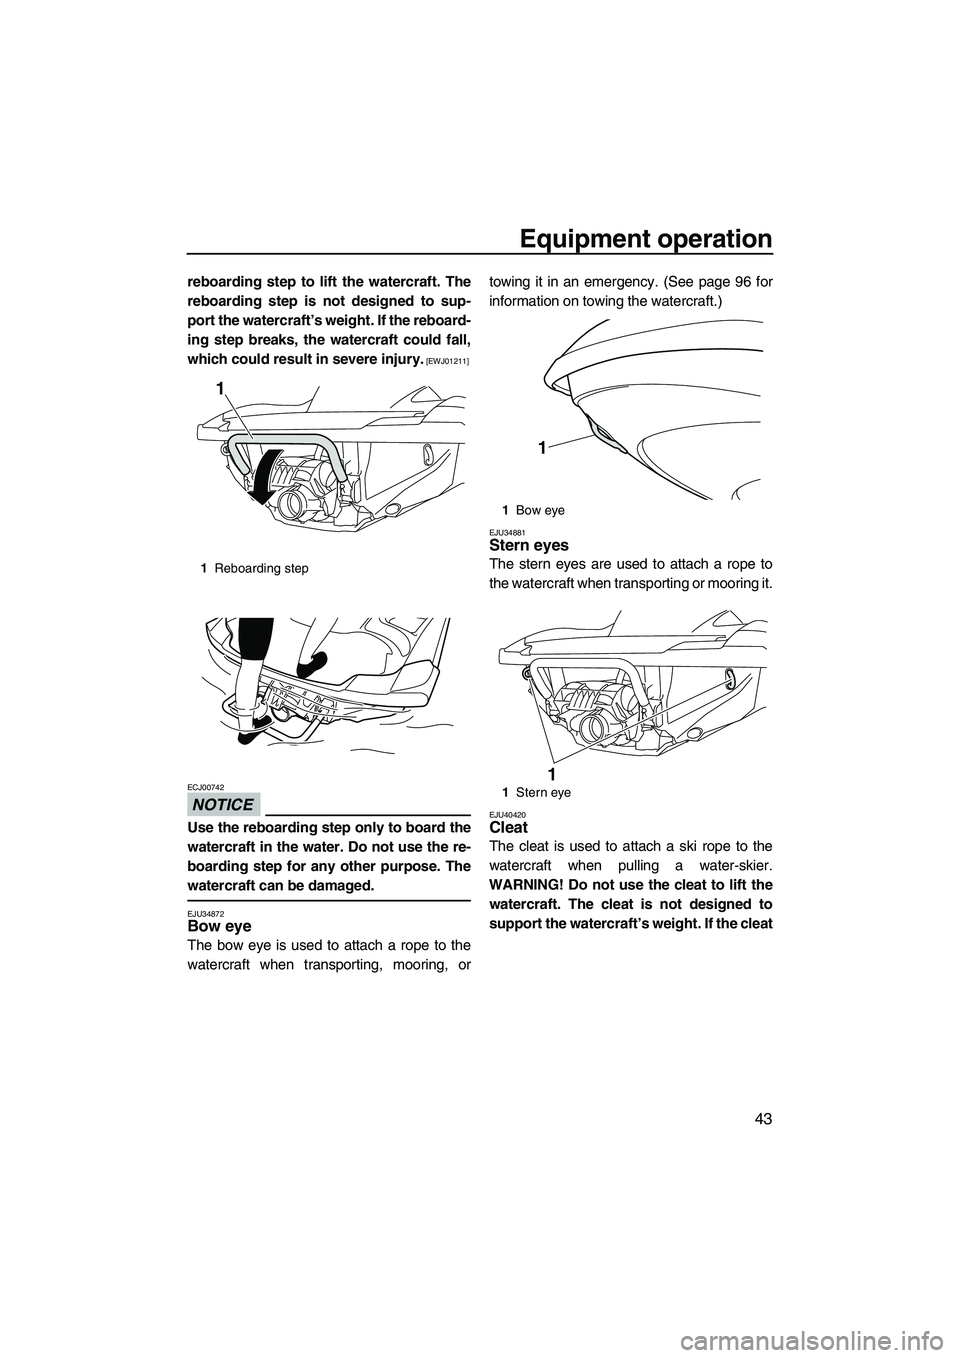 YAMAHA FZS 2013  Owners Manual Equipment operation
43
reboarding step to lift the watercraft. The
reboarding step is not designed to sup-
port the watercraft’s weight. If the reboard-
ing step breaks, the watercraft could fall,
w